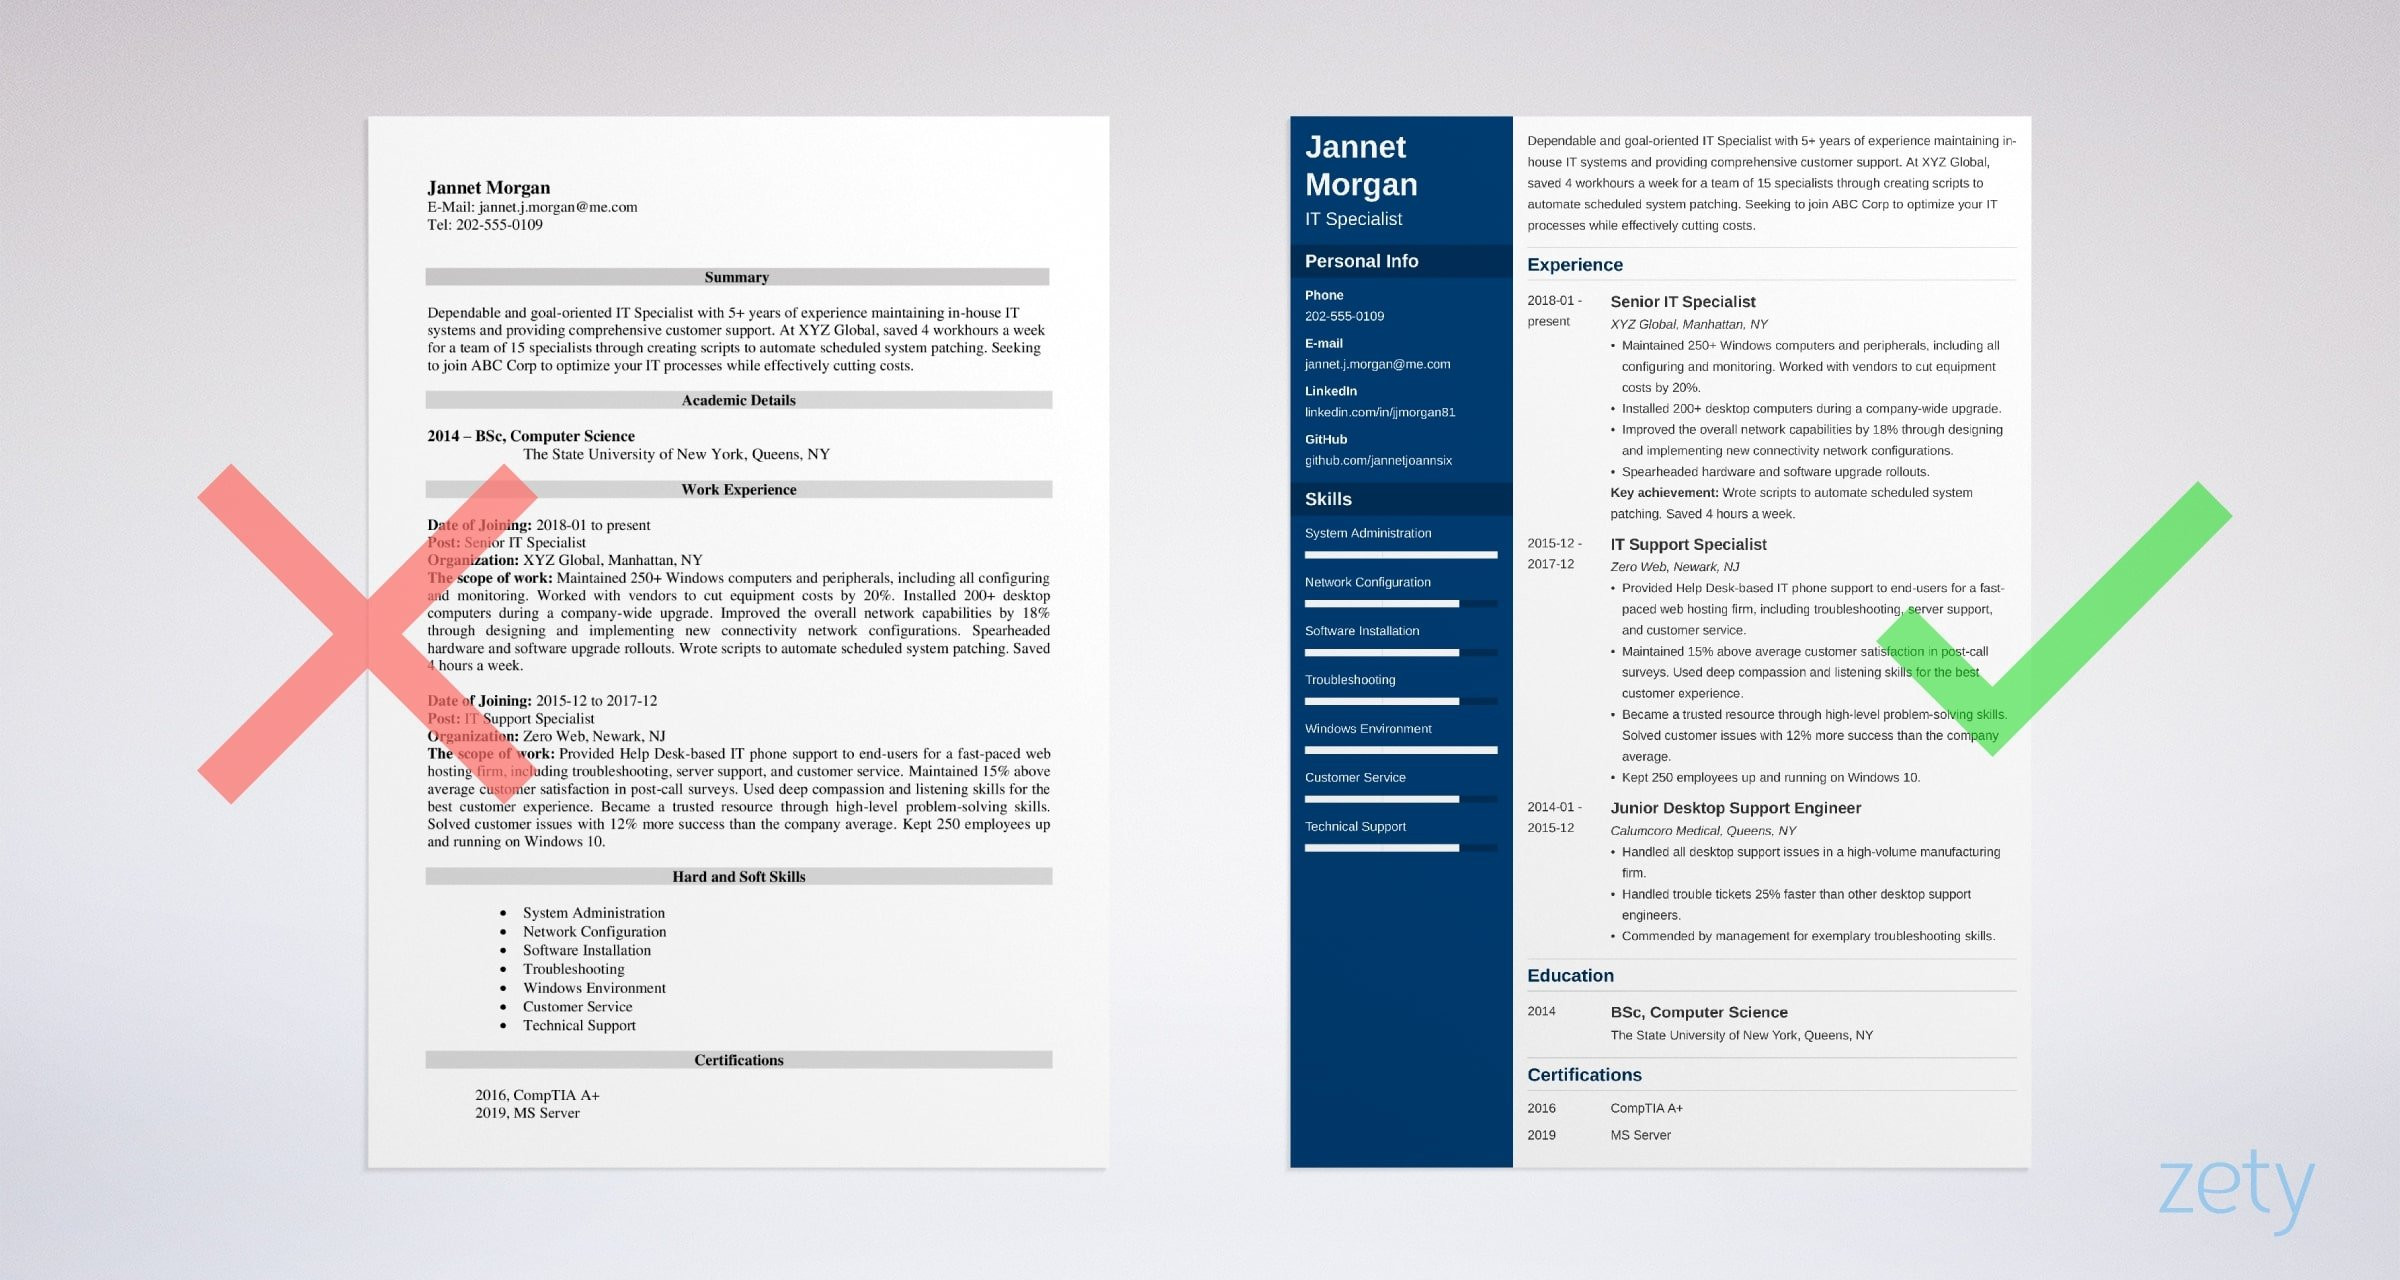 Latest Resume Sample for It Support Specialist It Specialist Resume Sample (guide & Template)